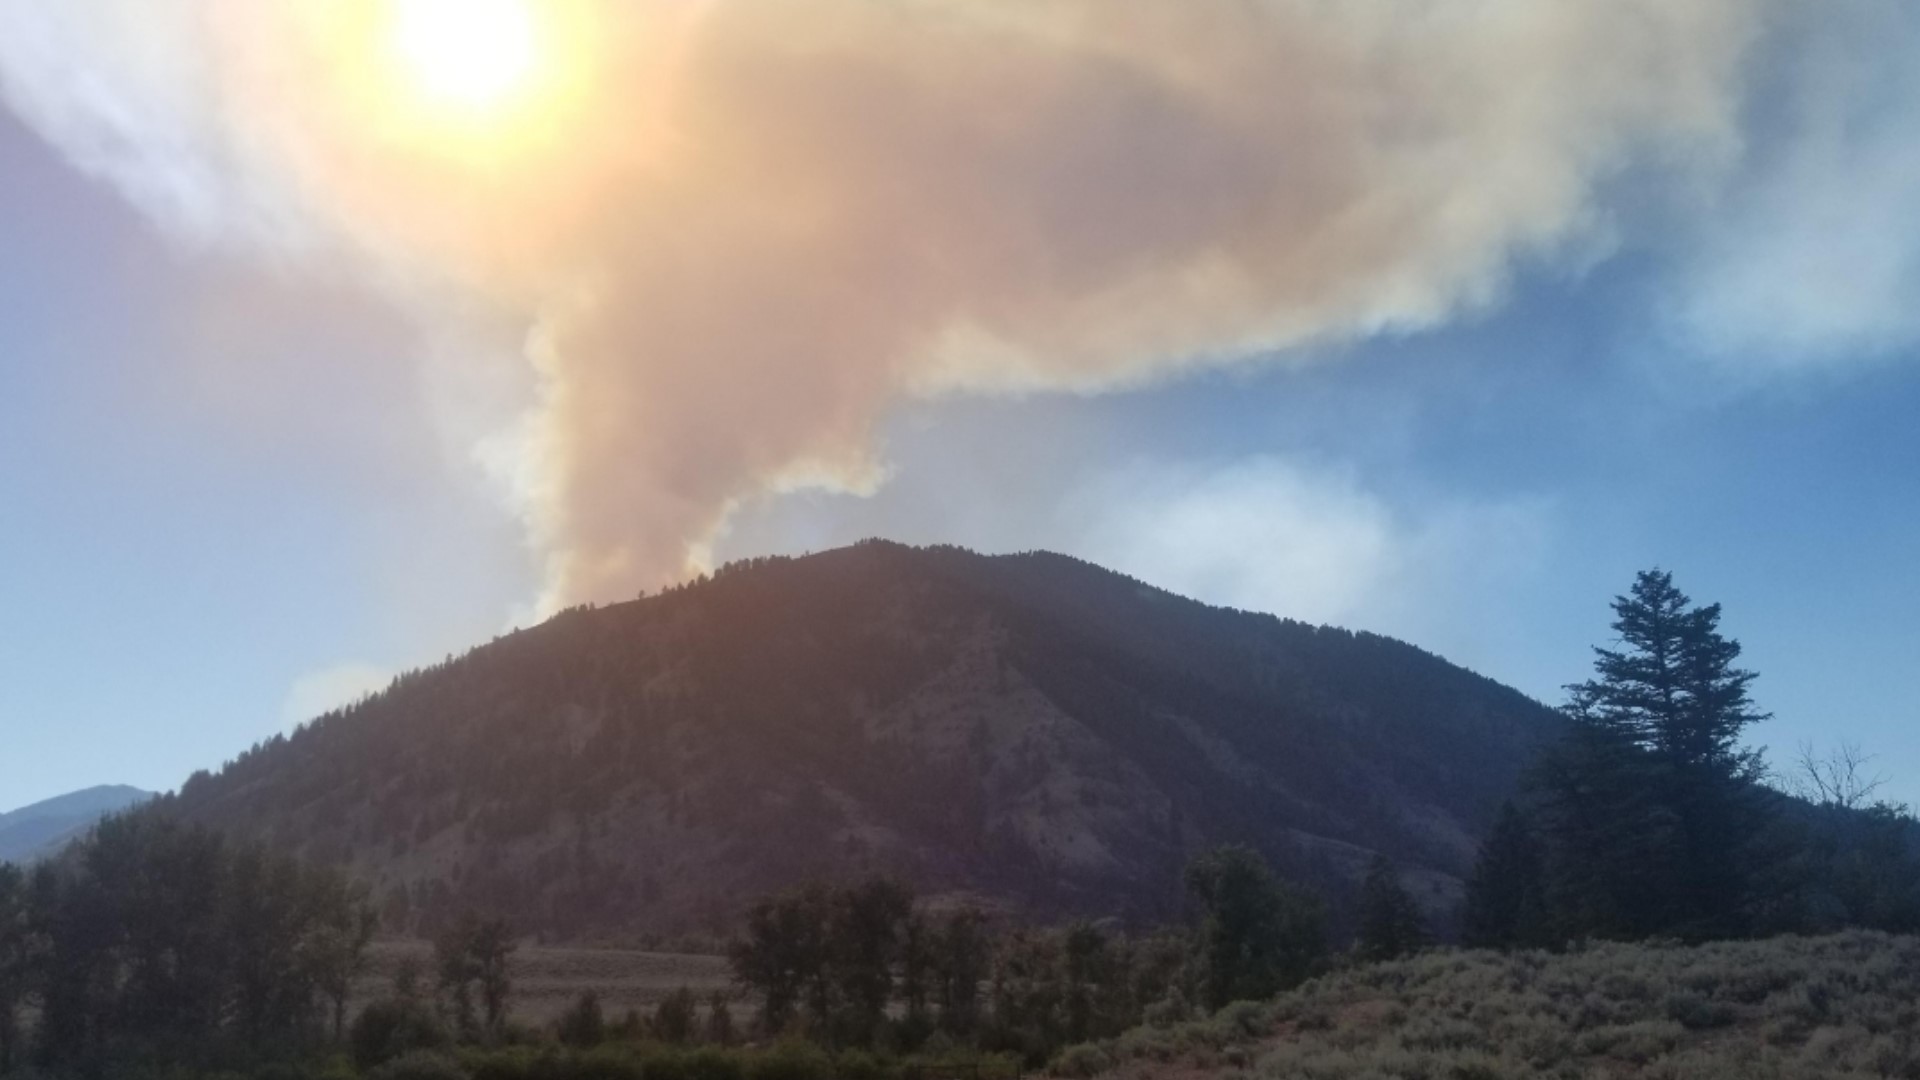 The Woodtick Fire has burned 5,698 acres since July 14. It's located about 27 miles north-northwest of Challis, in the Middle Fork Ranger District.